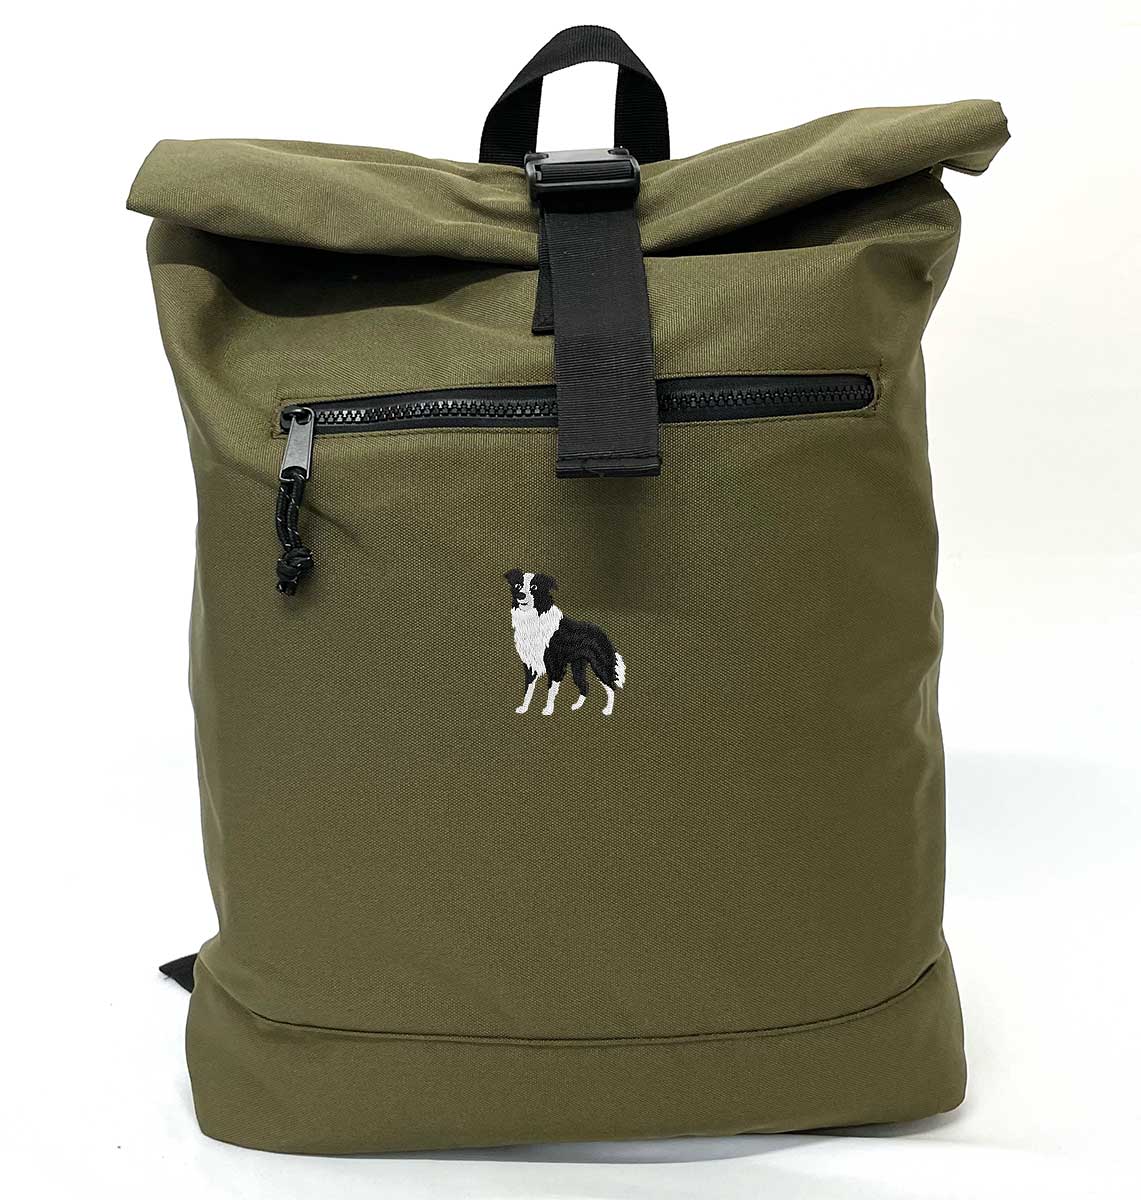 Border Collie Beach Roll-top Recycled Backpack - Blue Panda